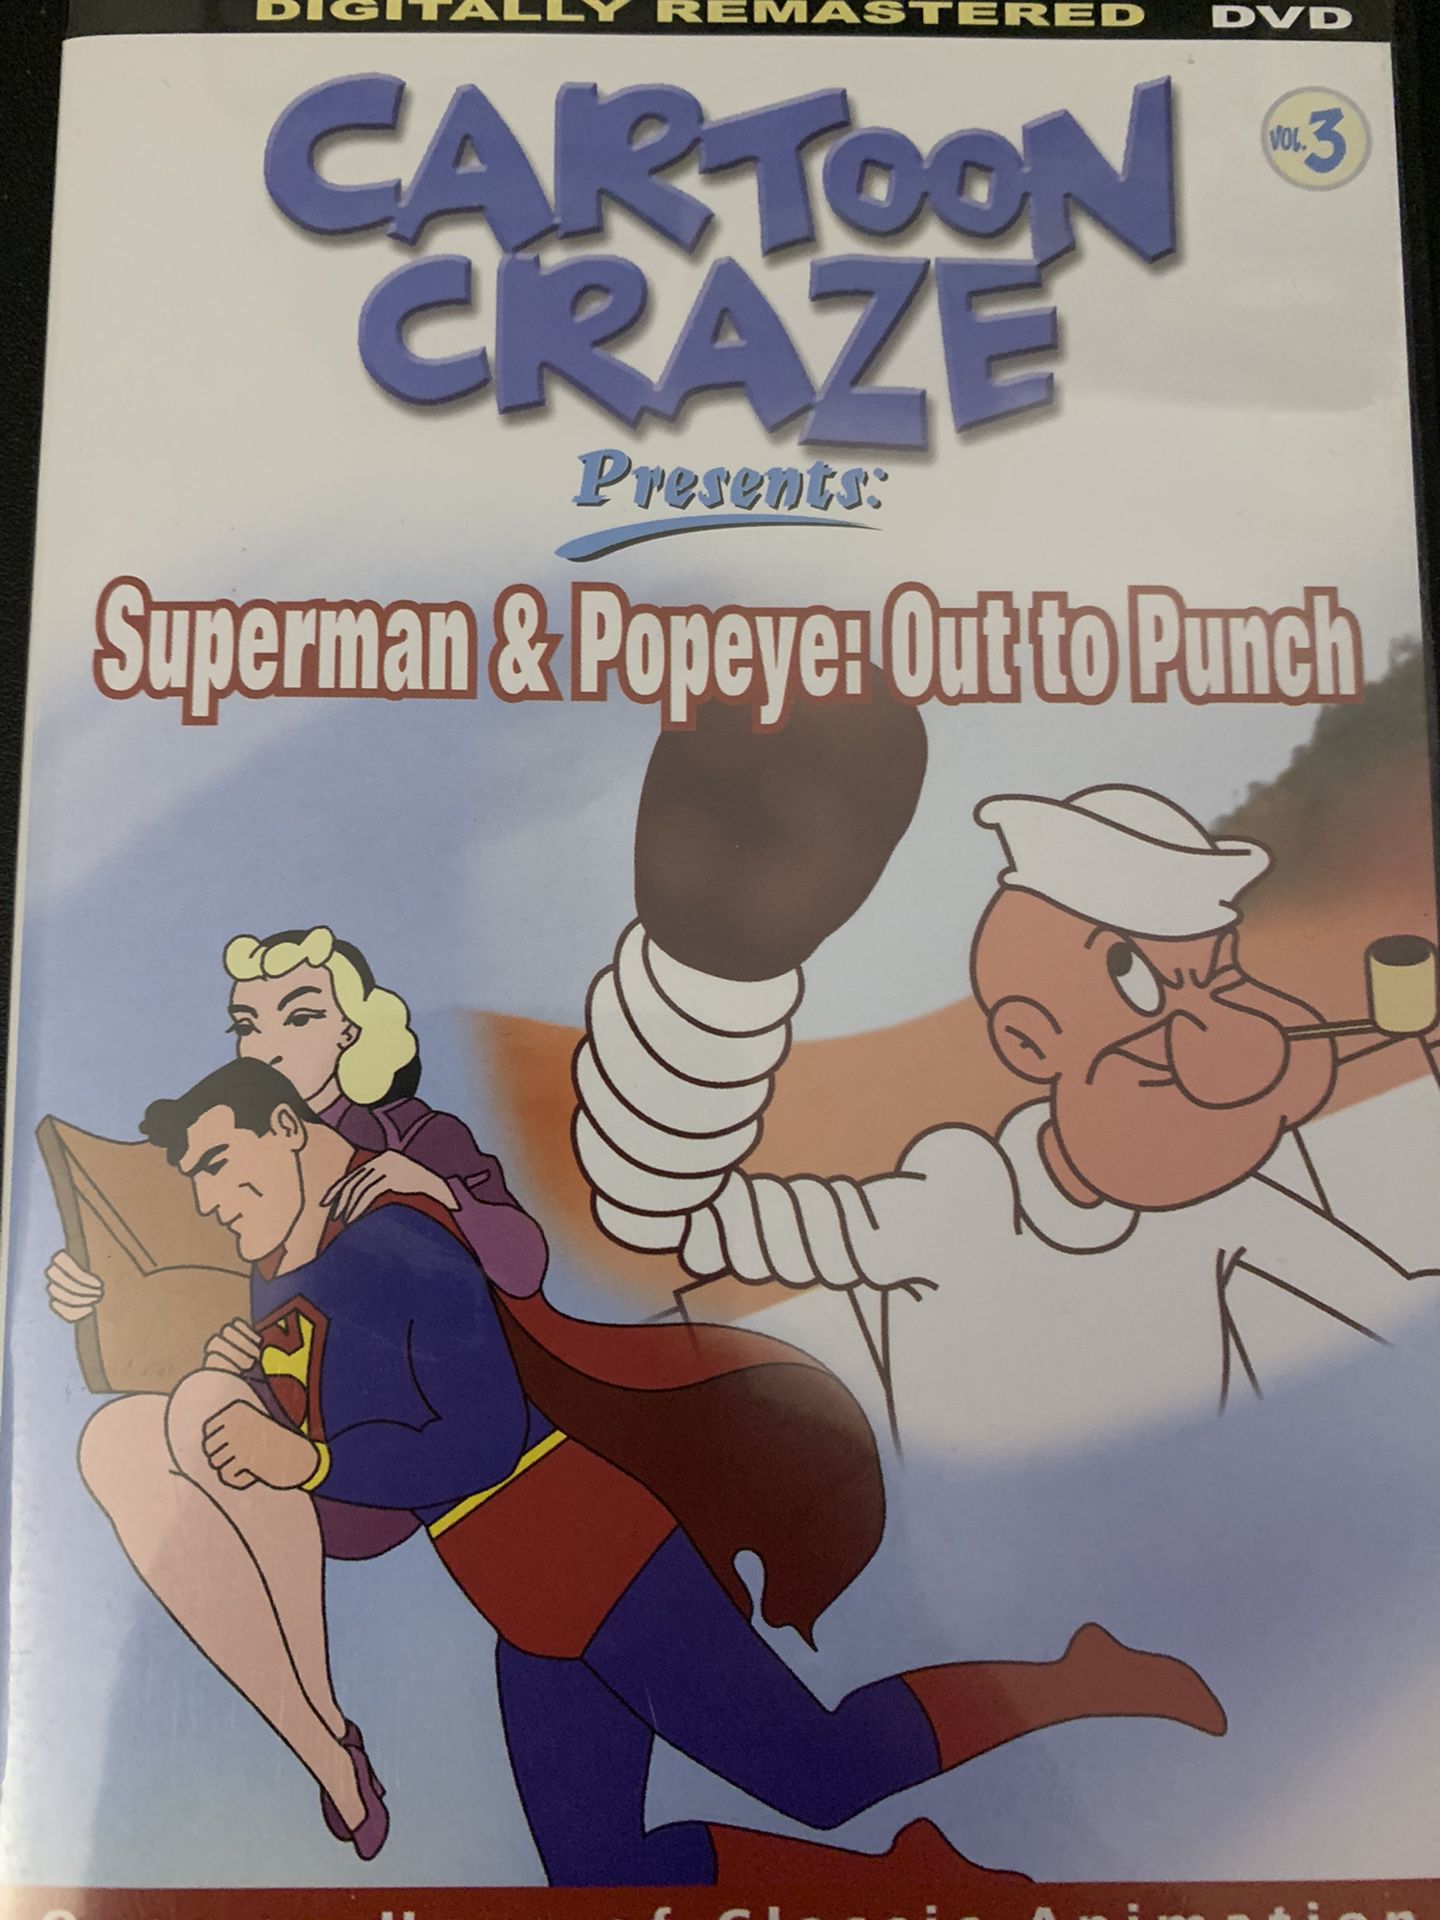 CARTOON CRAZE: Superman & POPEYE Out To Punch (DVD)